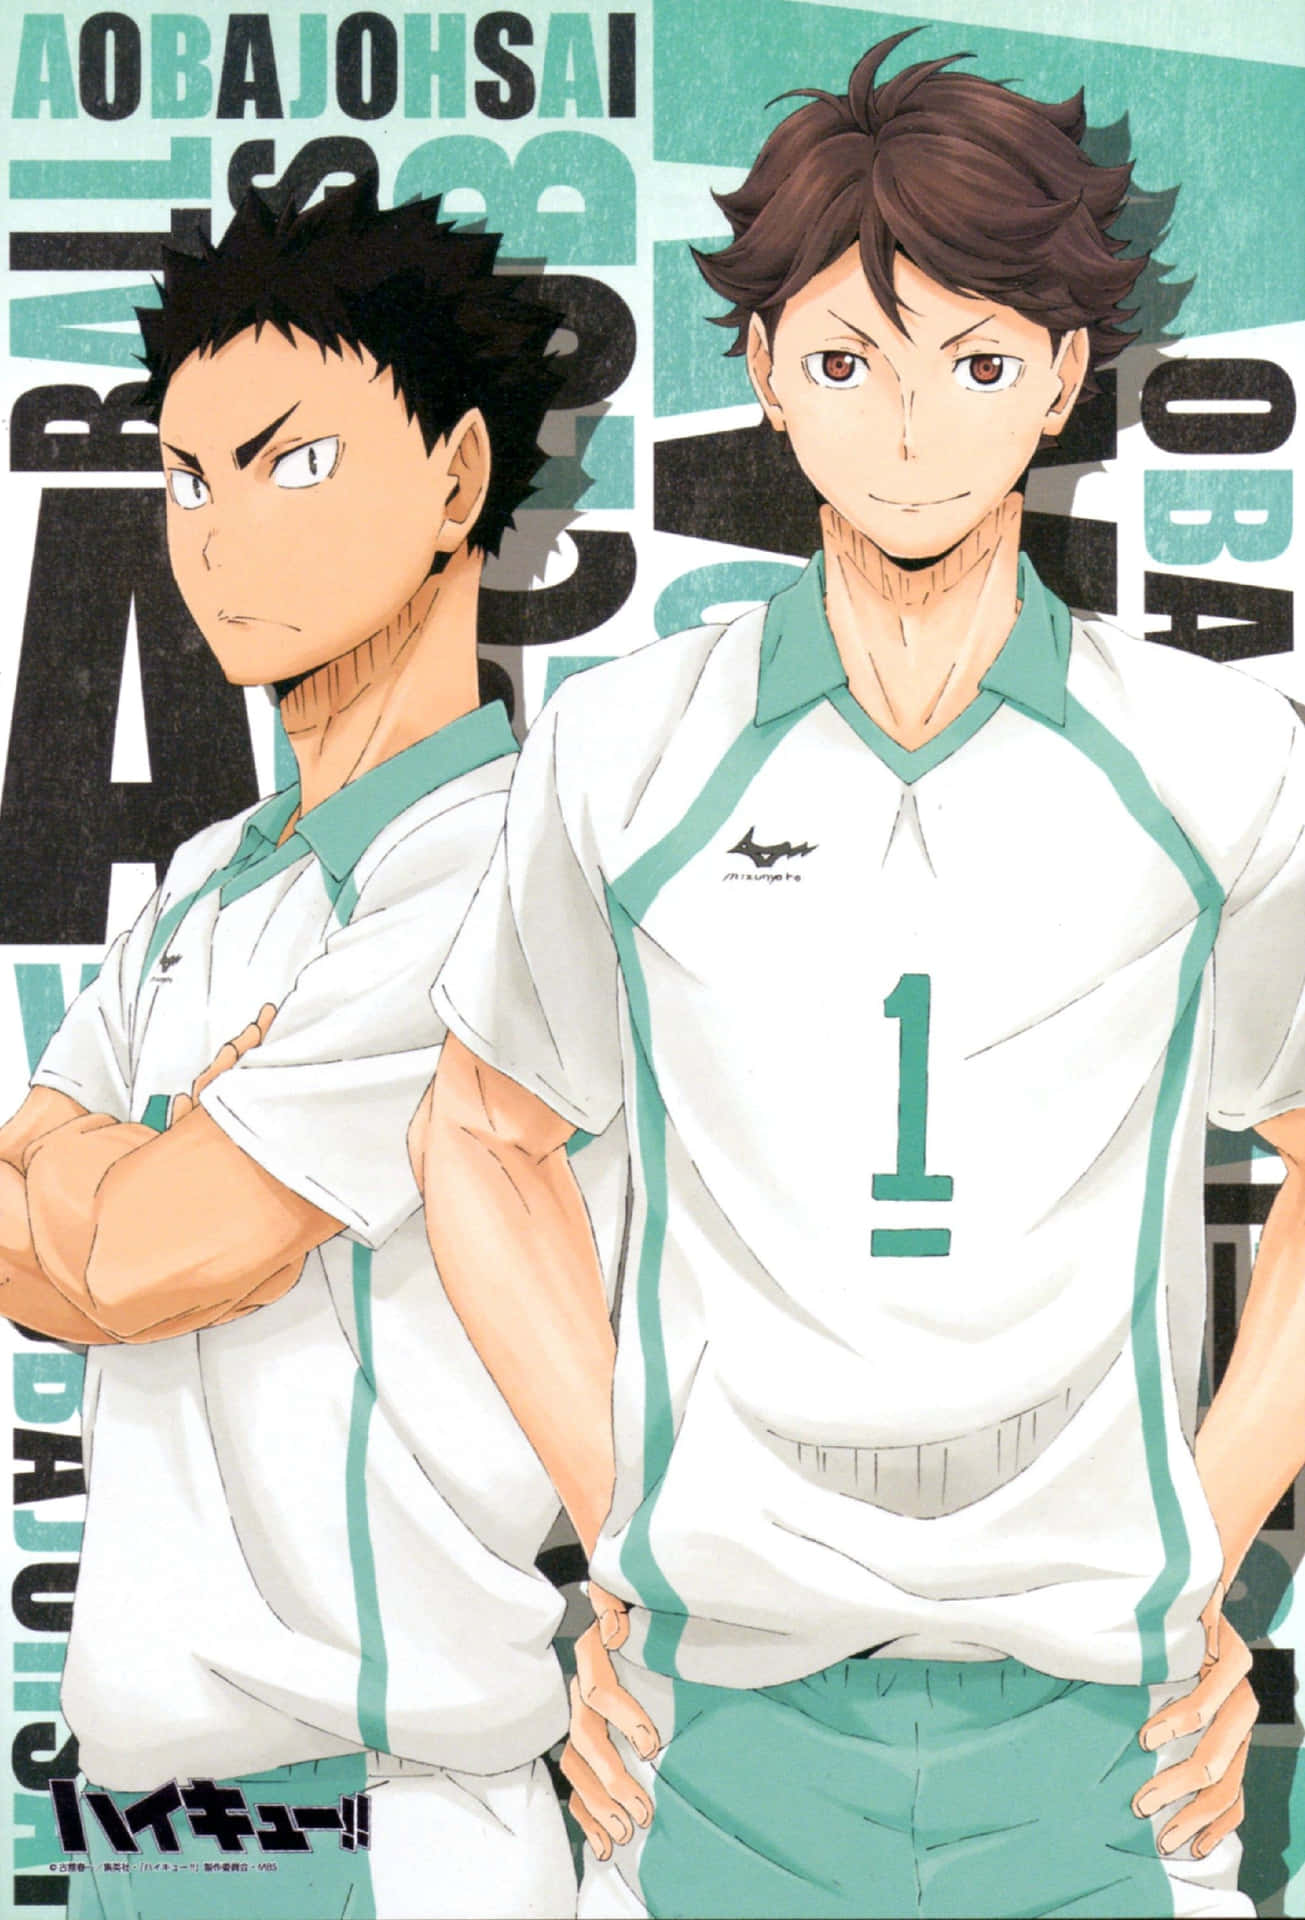 Iwaizumi Hajime Striking A Powerful Volleyball Serve In Action Background